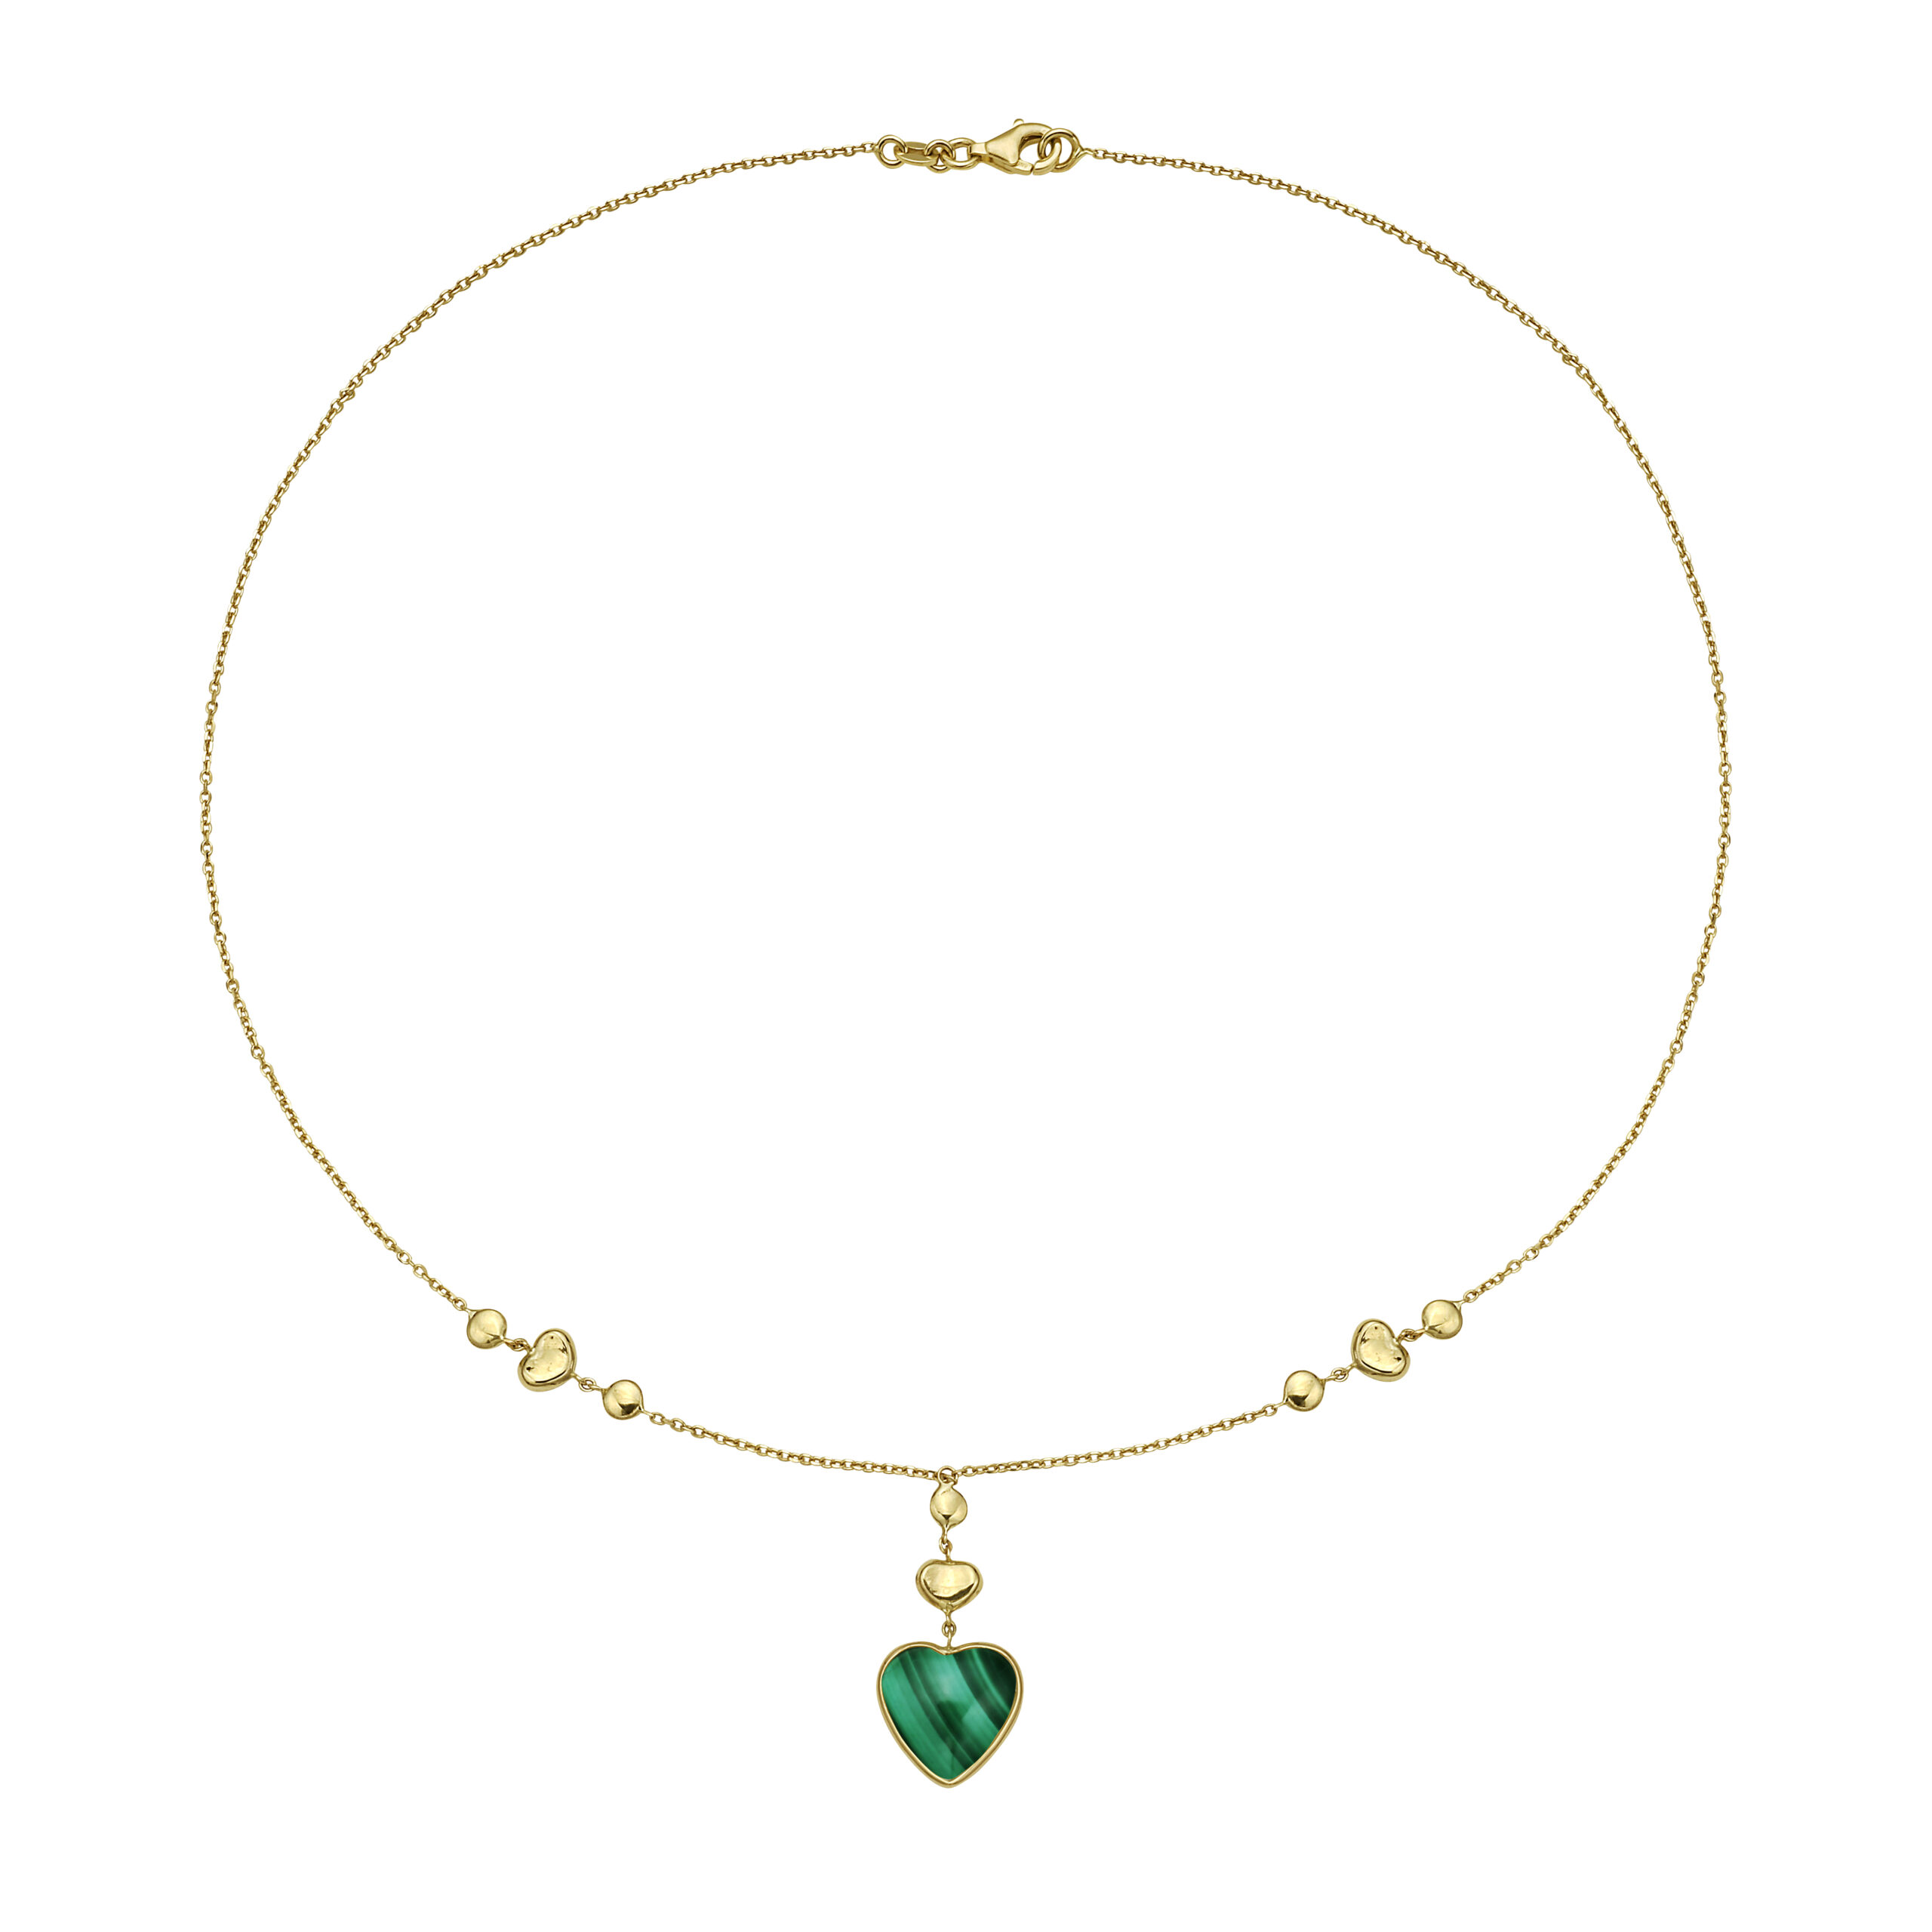 Runa Heart Charm Lariat Necklace in 14K Yellow Gold With Malachite